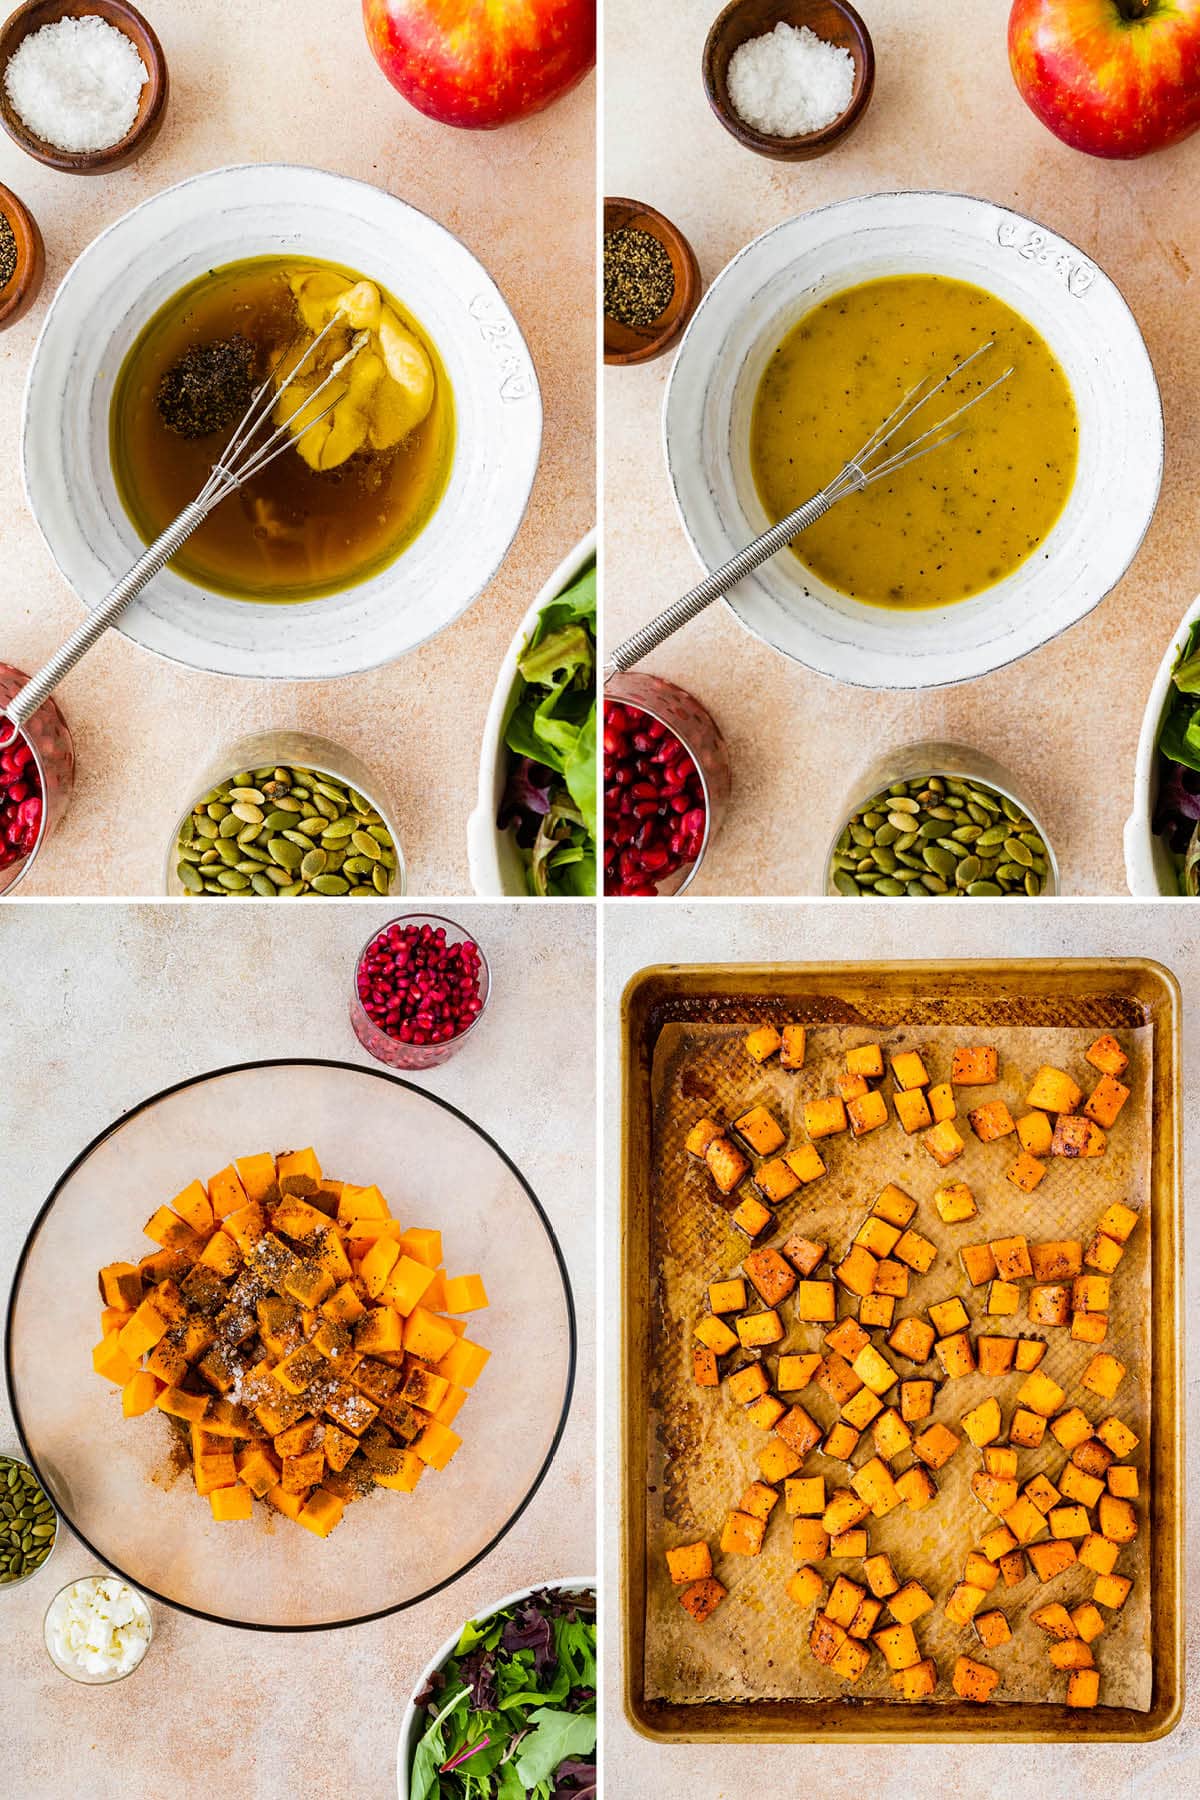 Collage of four photos: two showing the steps to whisk together a maple dijon dressing, and two photos showing steps to roasting cinnamon spiced butternut squash, seasoning cubes of squash in a bowl and then roasting on a sheet pan.